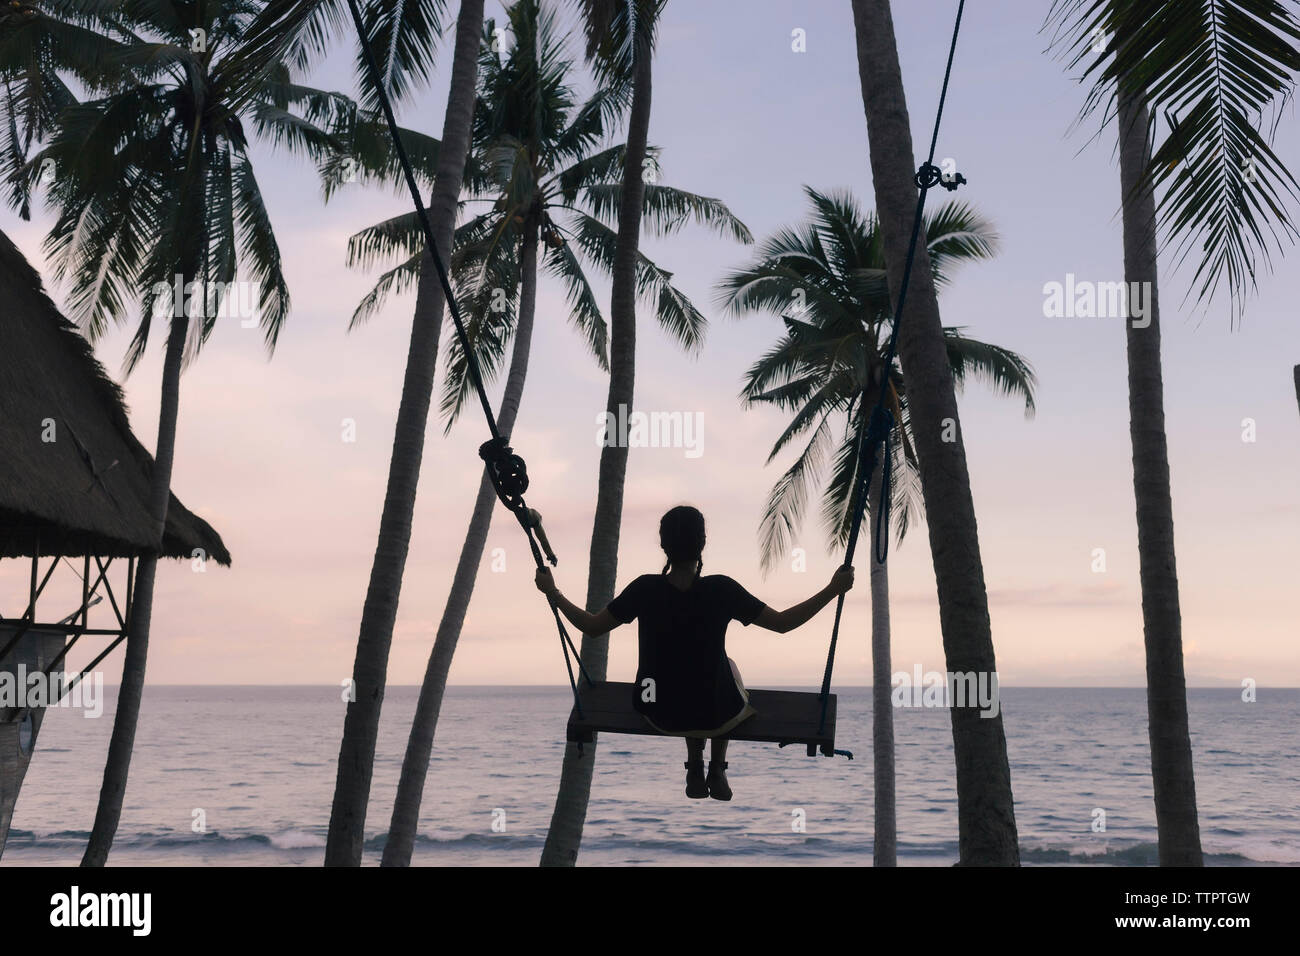 Rear view of young woman swinging on rope swing against coconut palm trees at beach during sunset Stock Photo